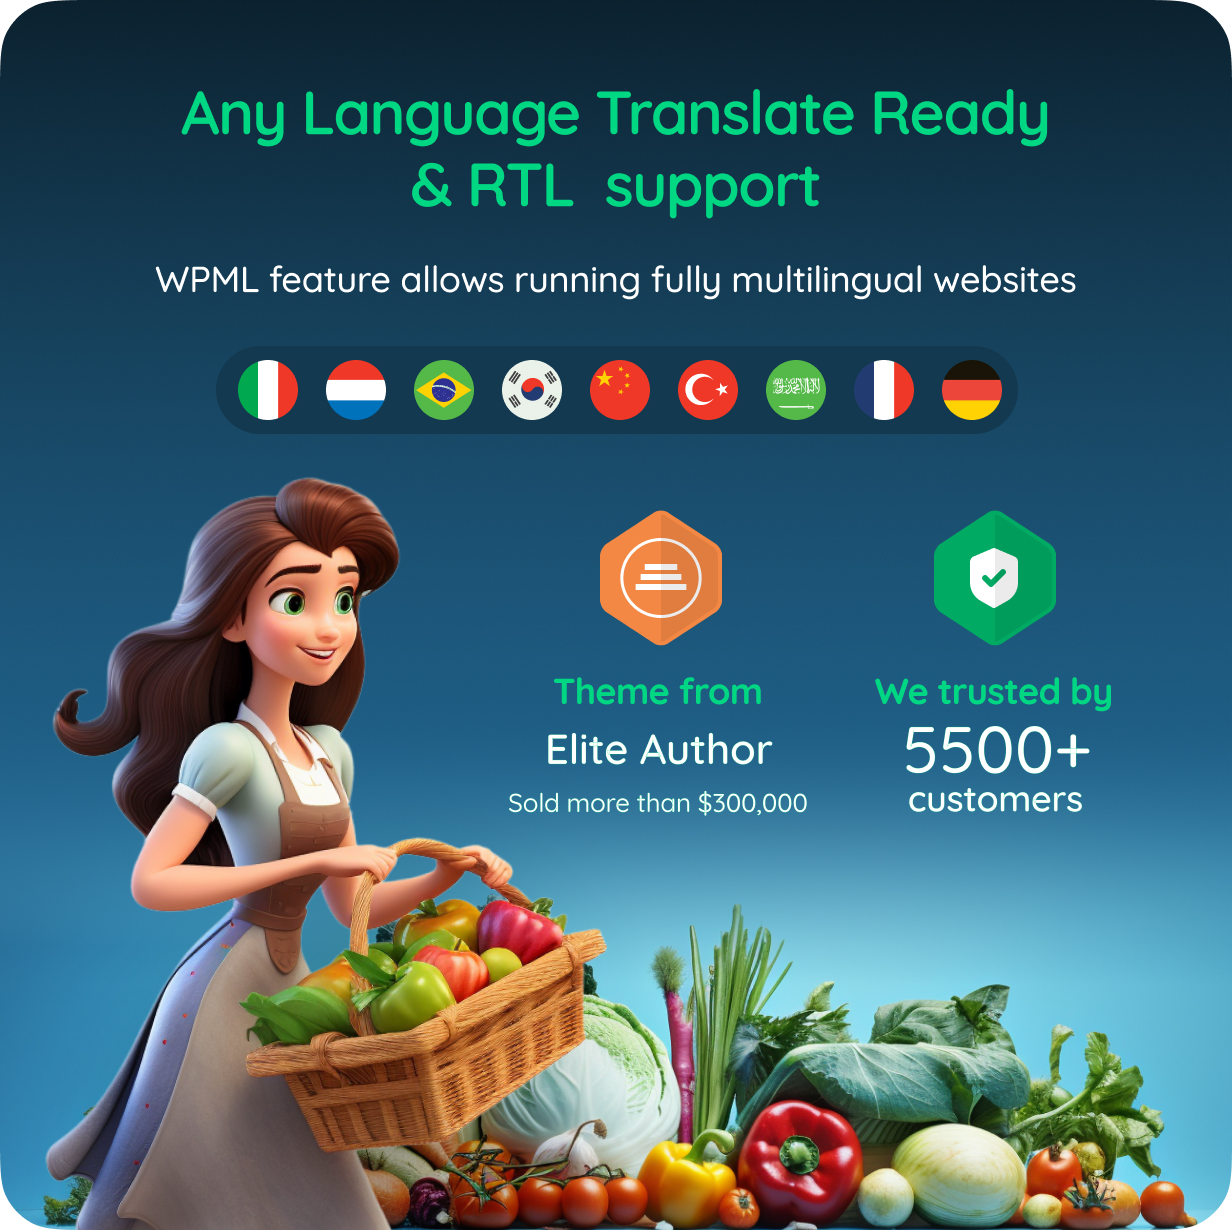 Tasty Daily - Any Language Translate Ready & RTL support